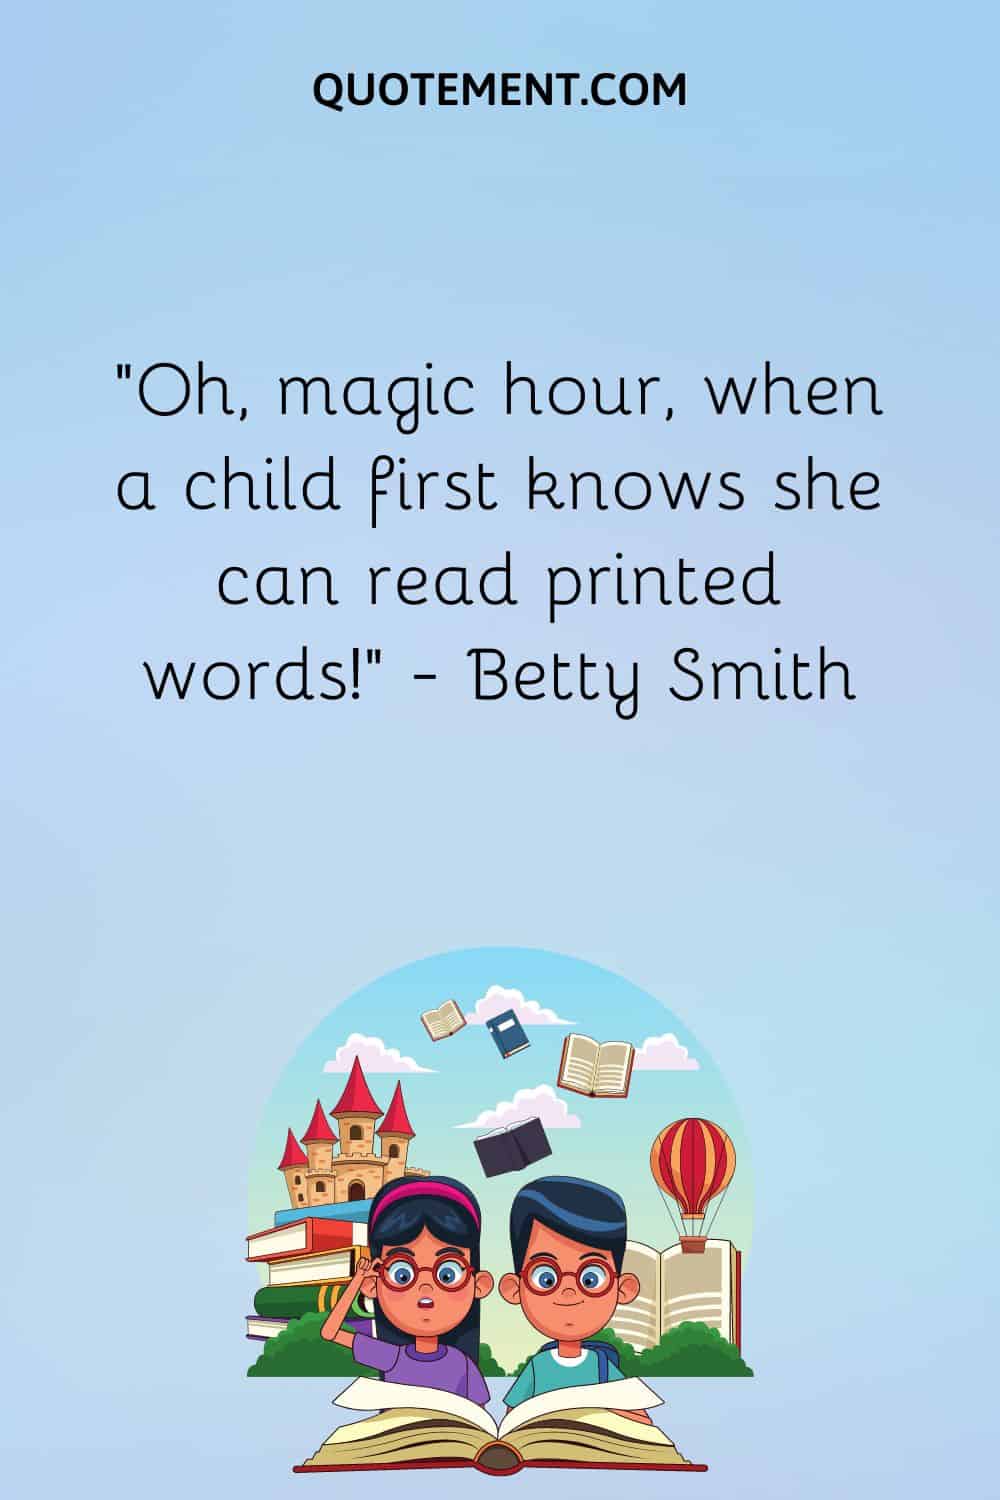 “Oh, magic hour, when a child first knows she can read printed words!” — Betty Smith
